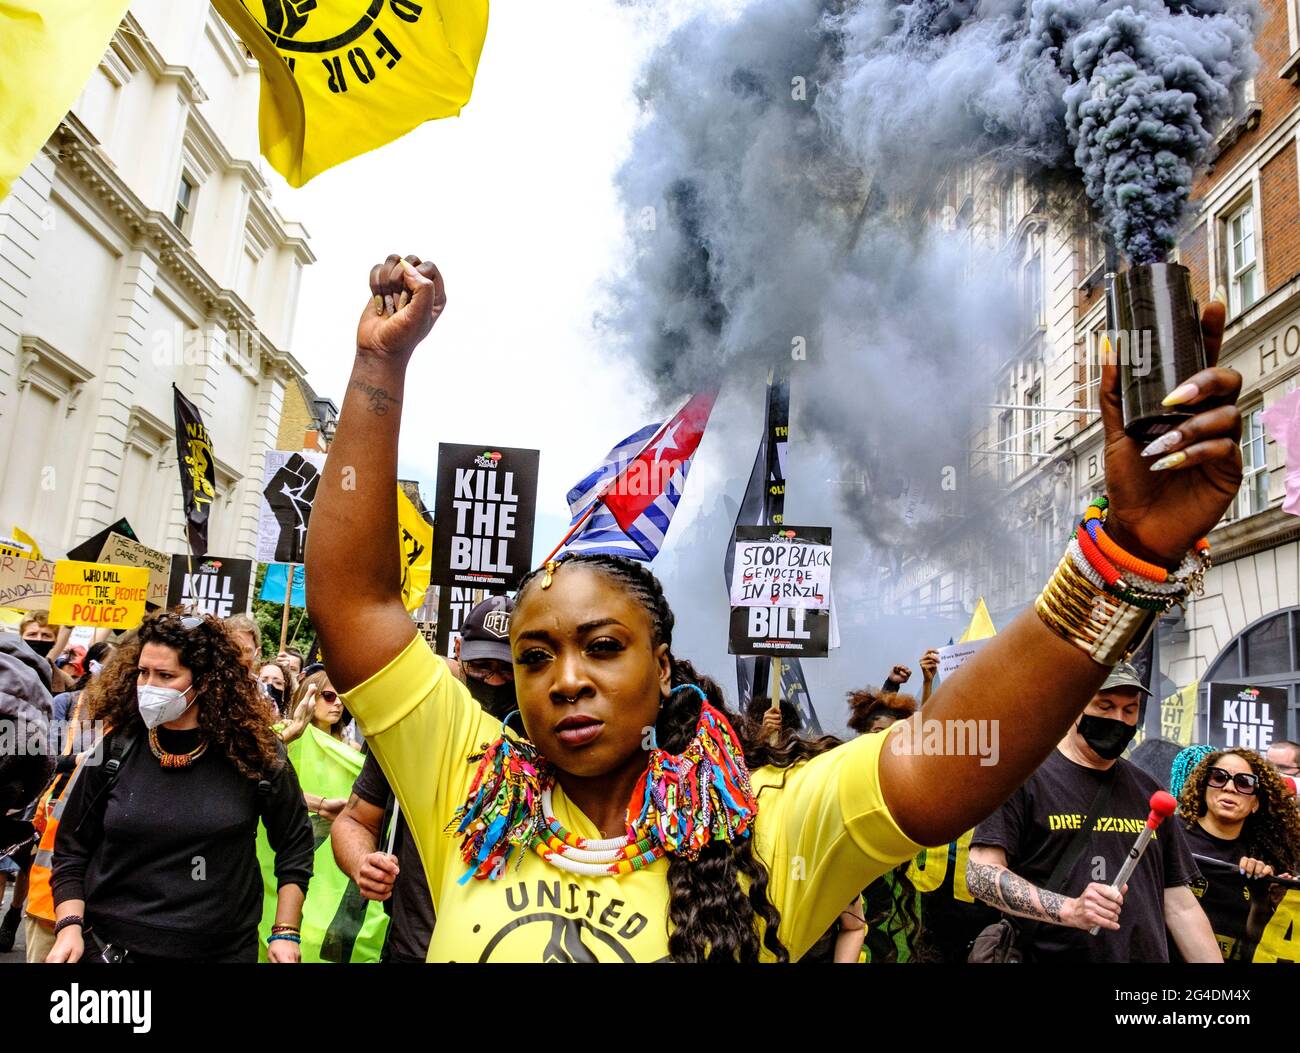 Marvina Newton leading a demonstration of Black lives Matter / Kill the Bill fighting against the use of police power as a means of silencing black voices, in response to recent killings of black people by the police. May 2021 Stock Photo